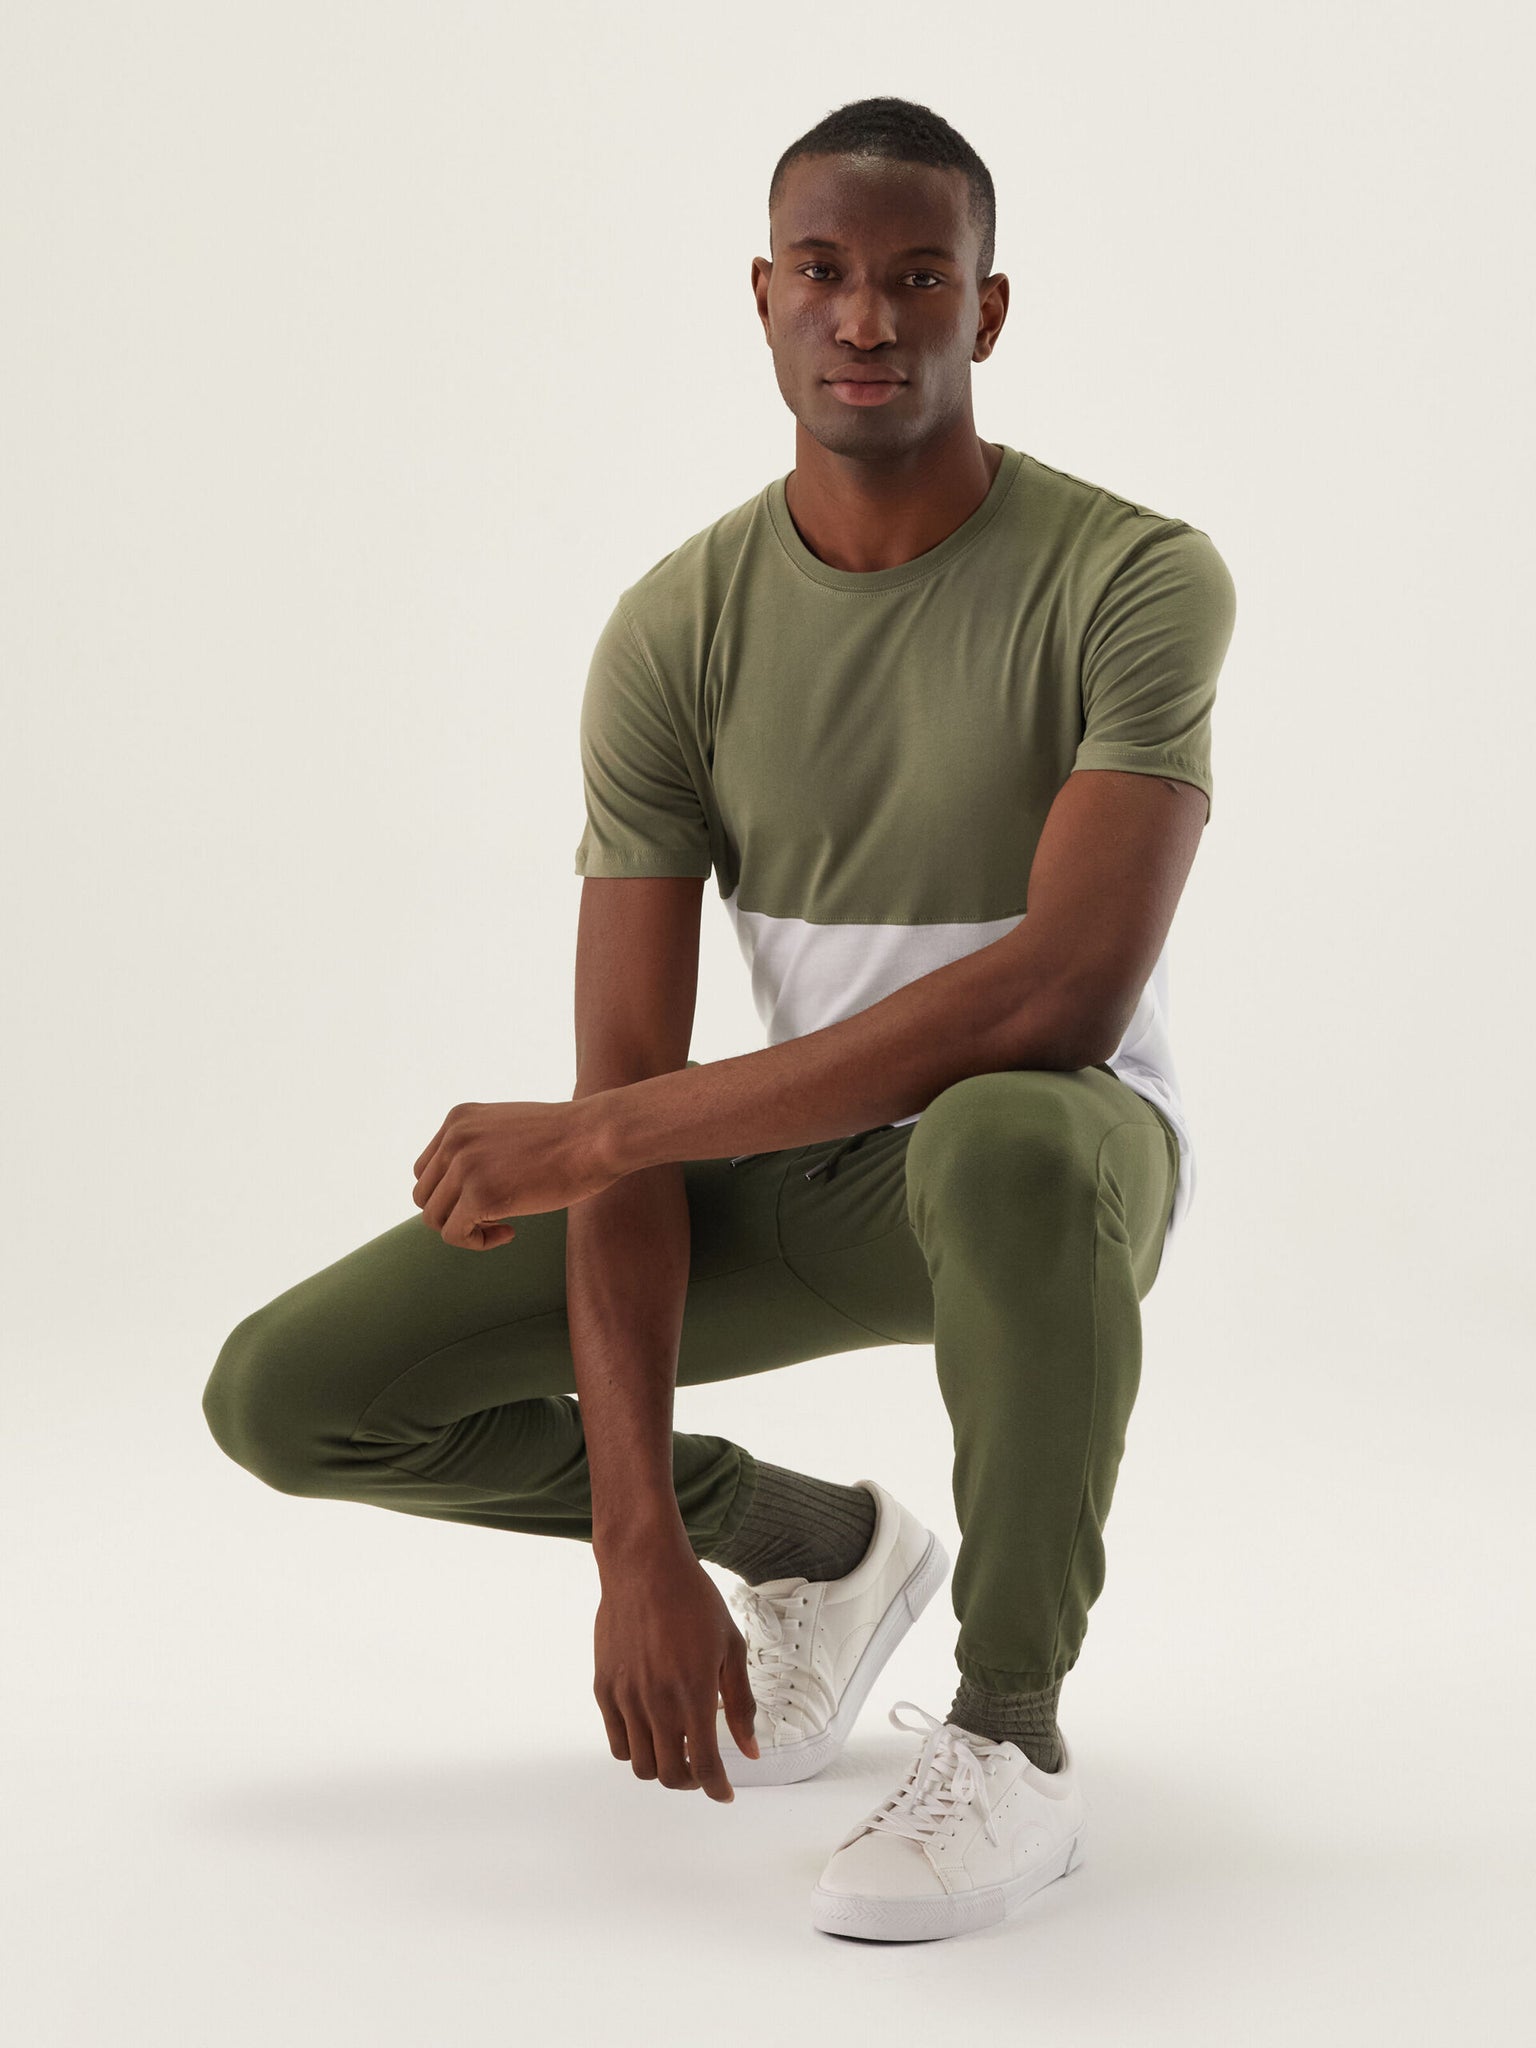 Recycled Cotton Jogging Pants